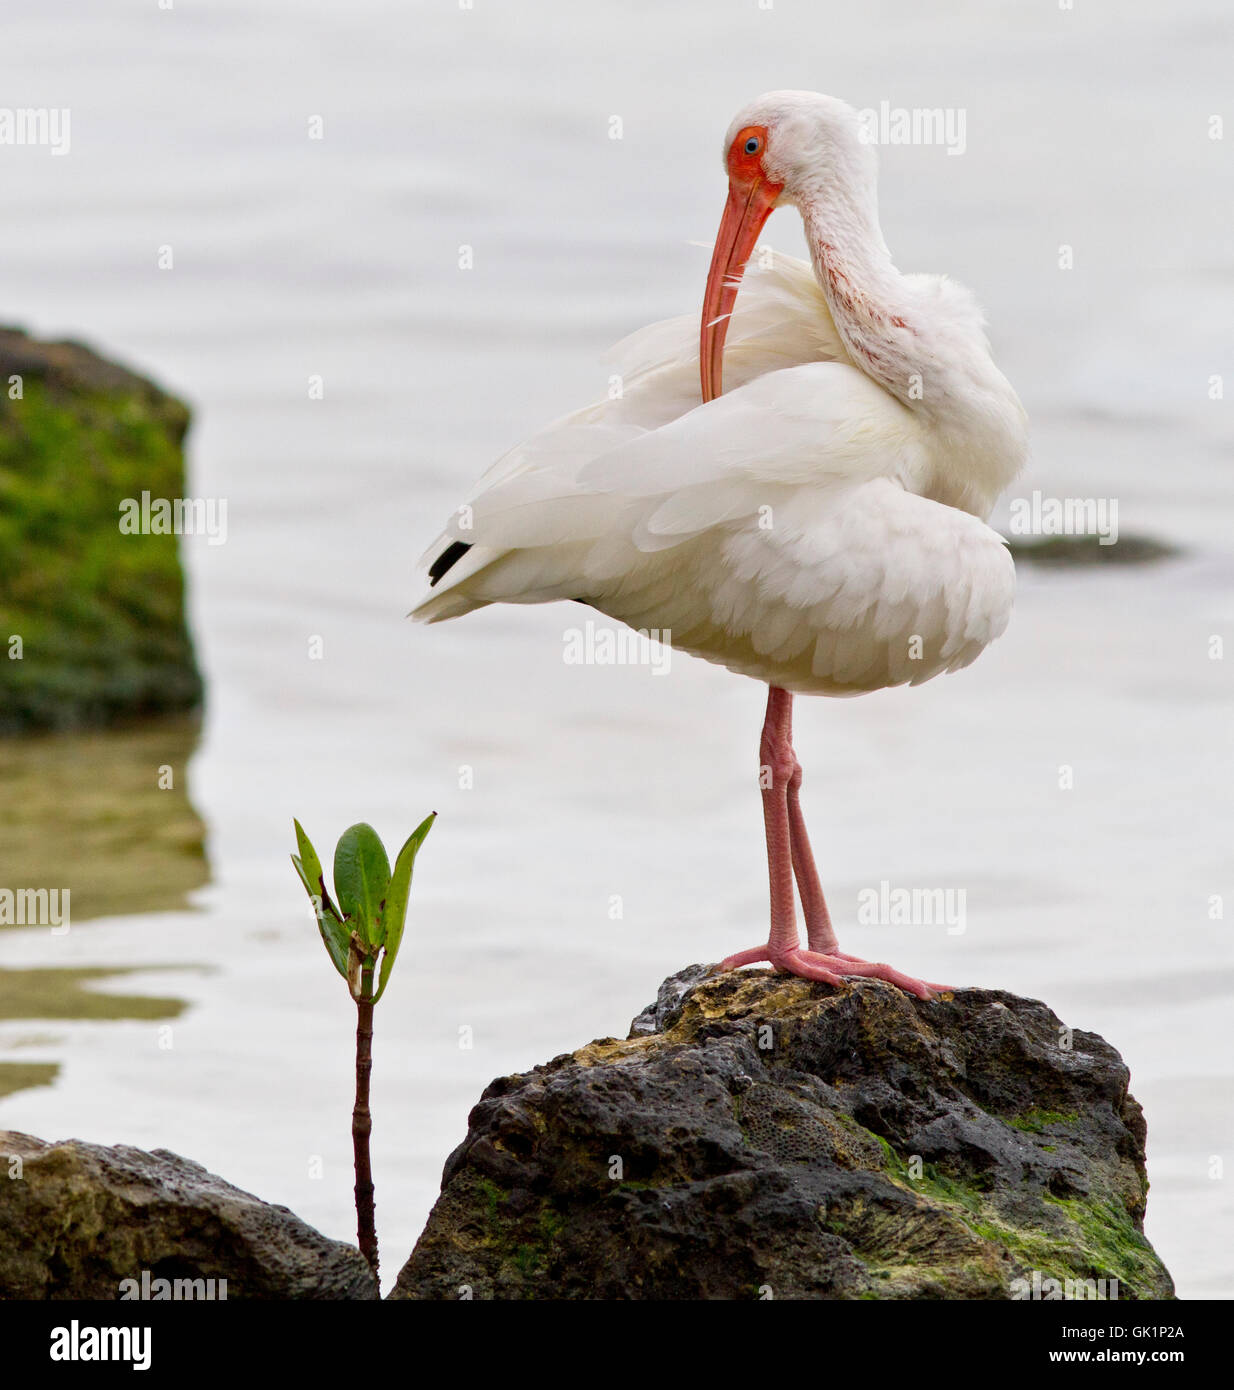 A White Ibis assumes a balletic pose while preening. It stands on coraliferous rock along Florida Bay, Key Largo. Stock Photo